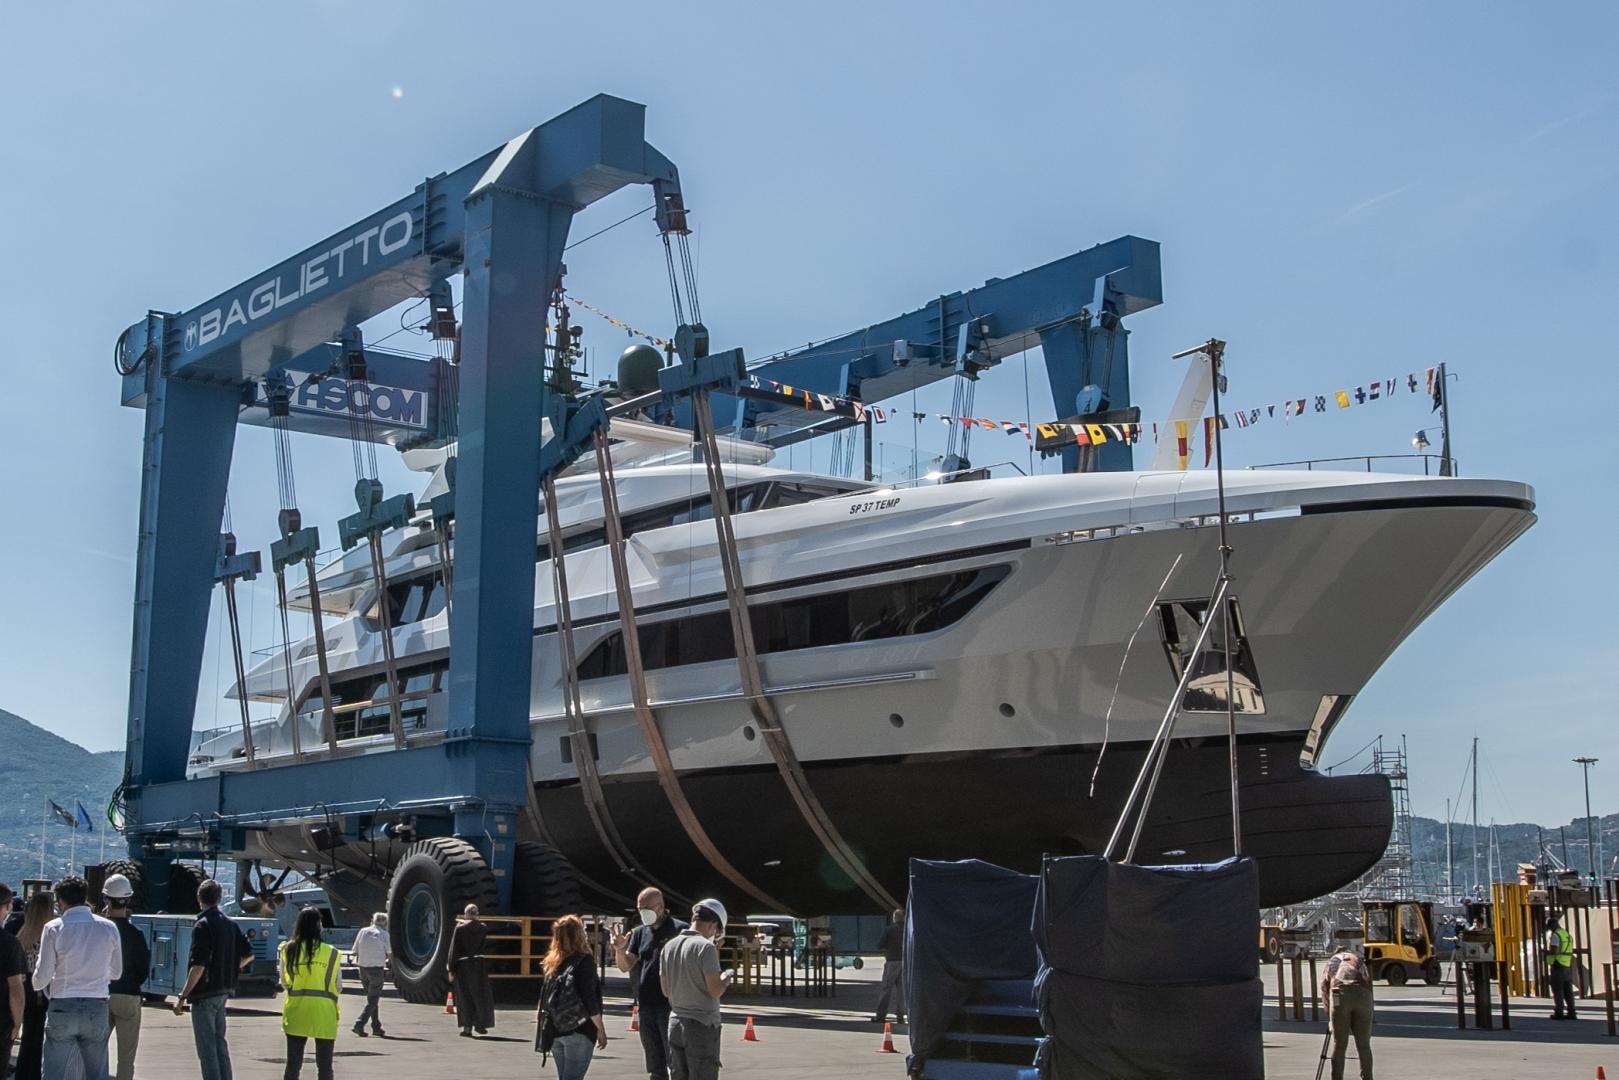 Baglietto is proud to announce the launch of motor yacht Lion